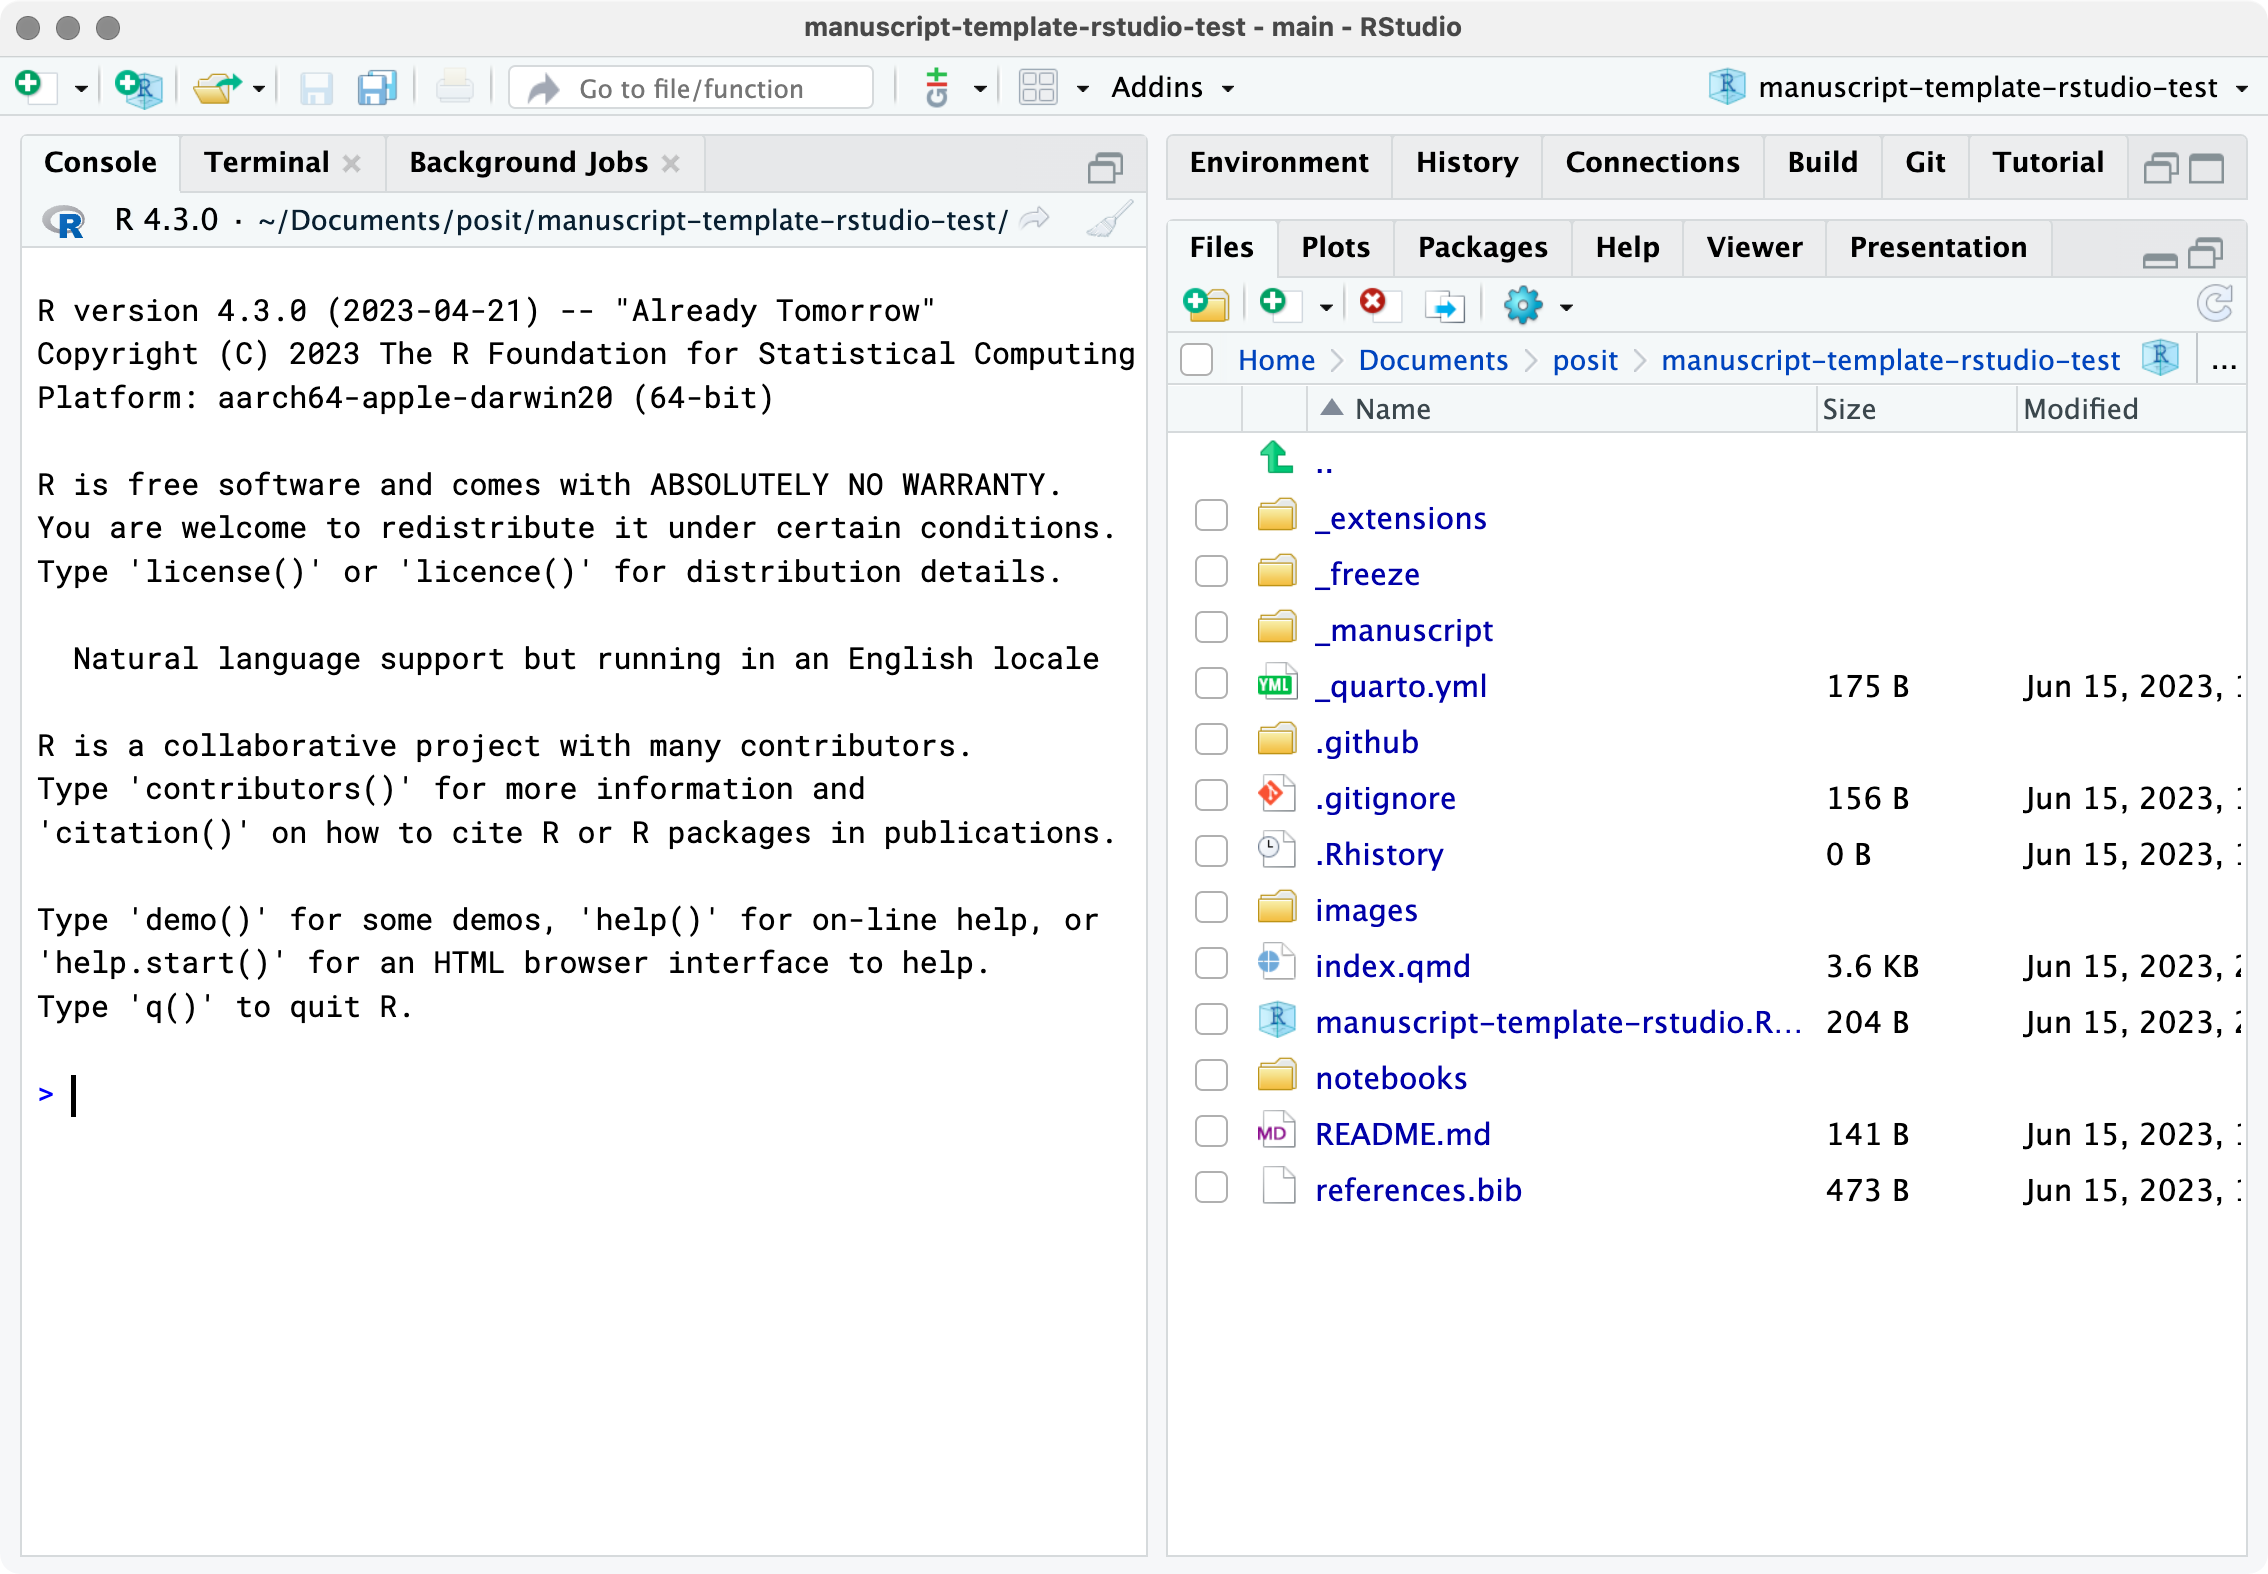 Screenshot of the RStudio IDE with a project called manuscript-template-rstudio-test open. The File pane shows the folders: _extensions, _freeze, .github, images, and notebooks; and the files: _quarto.yml, .gitignore, index.ipynb, README.md and references.bib.